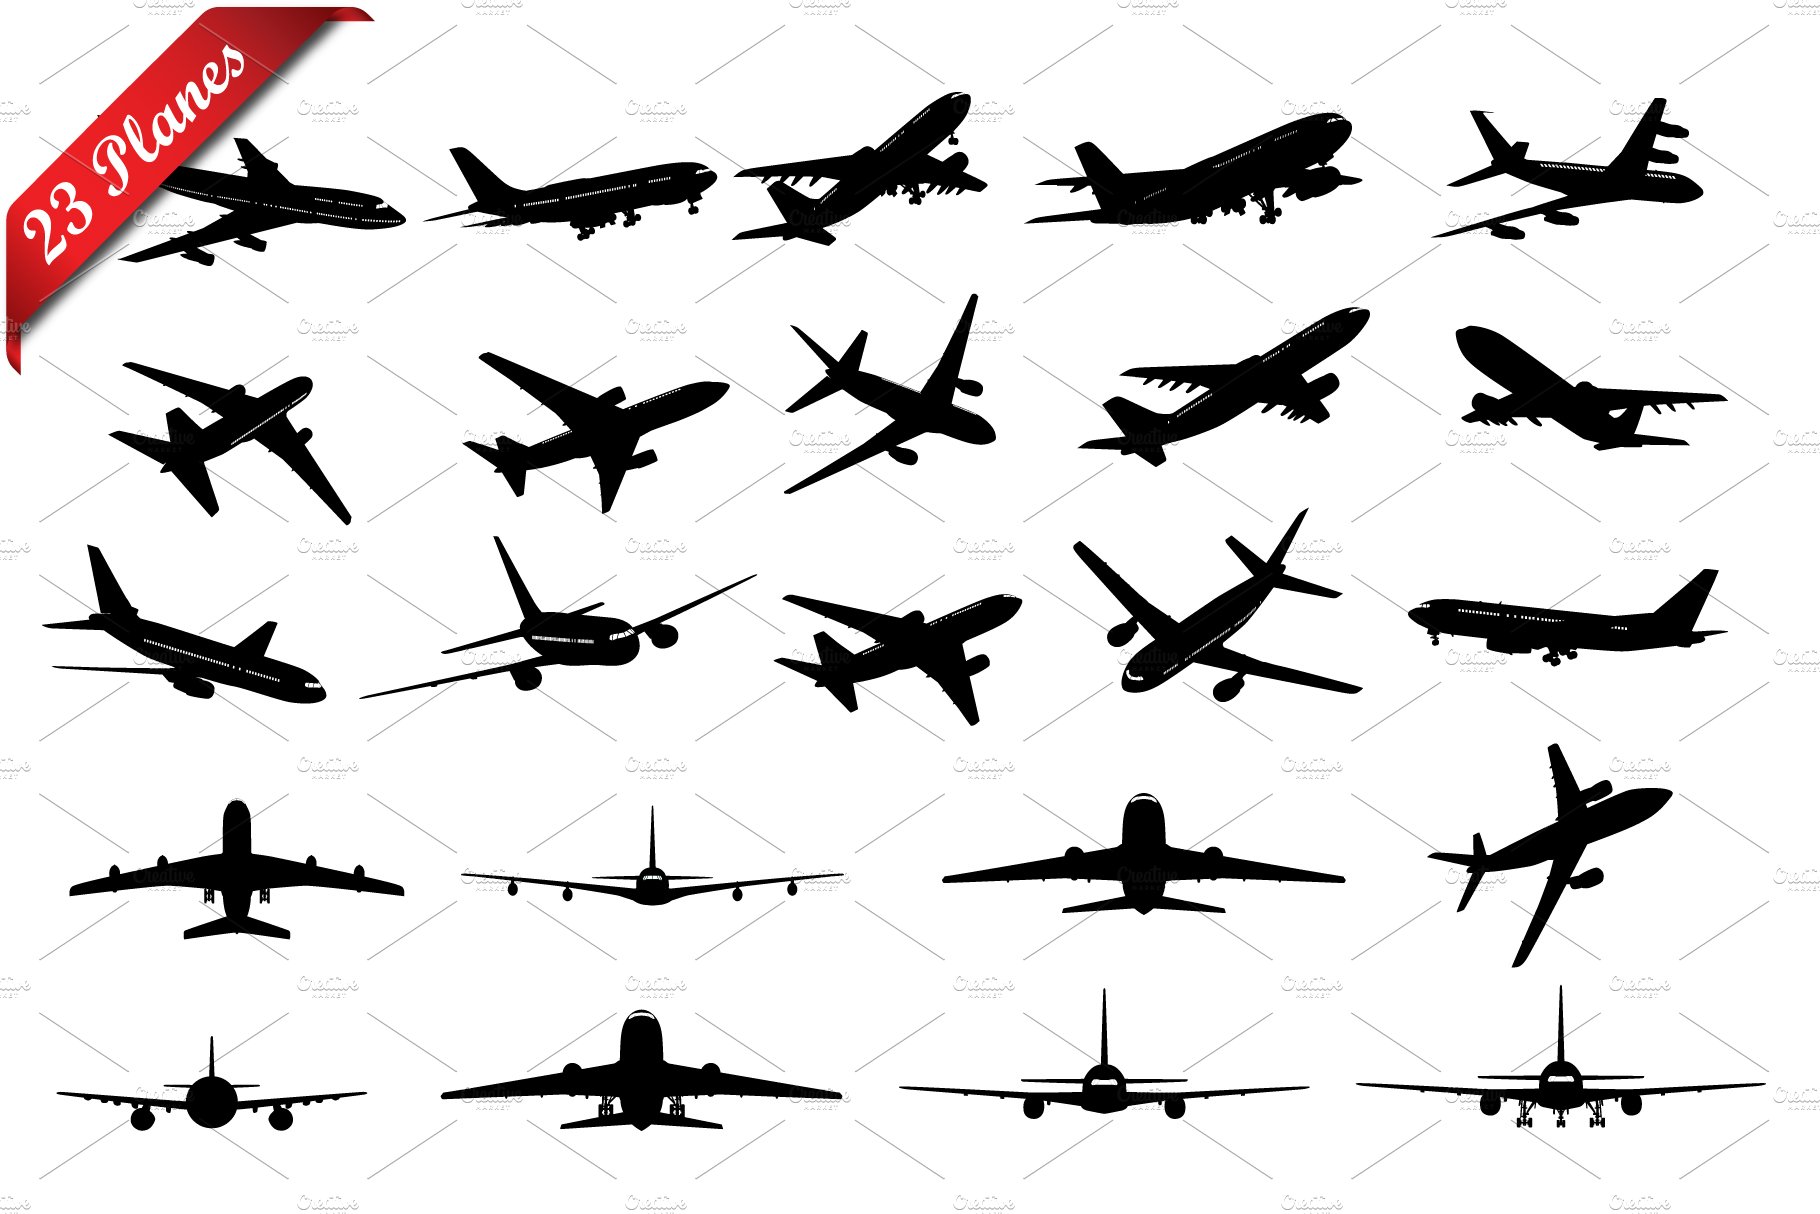 Set of Airplanes Silhouettes cover image.